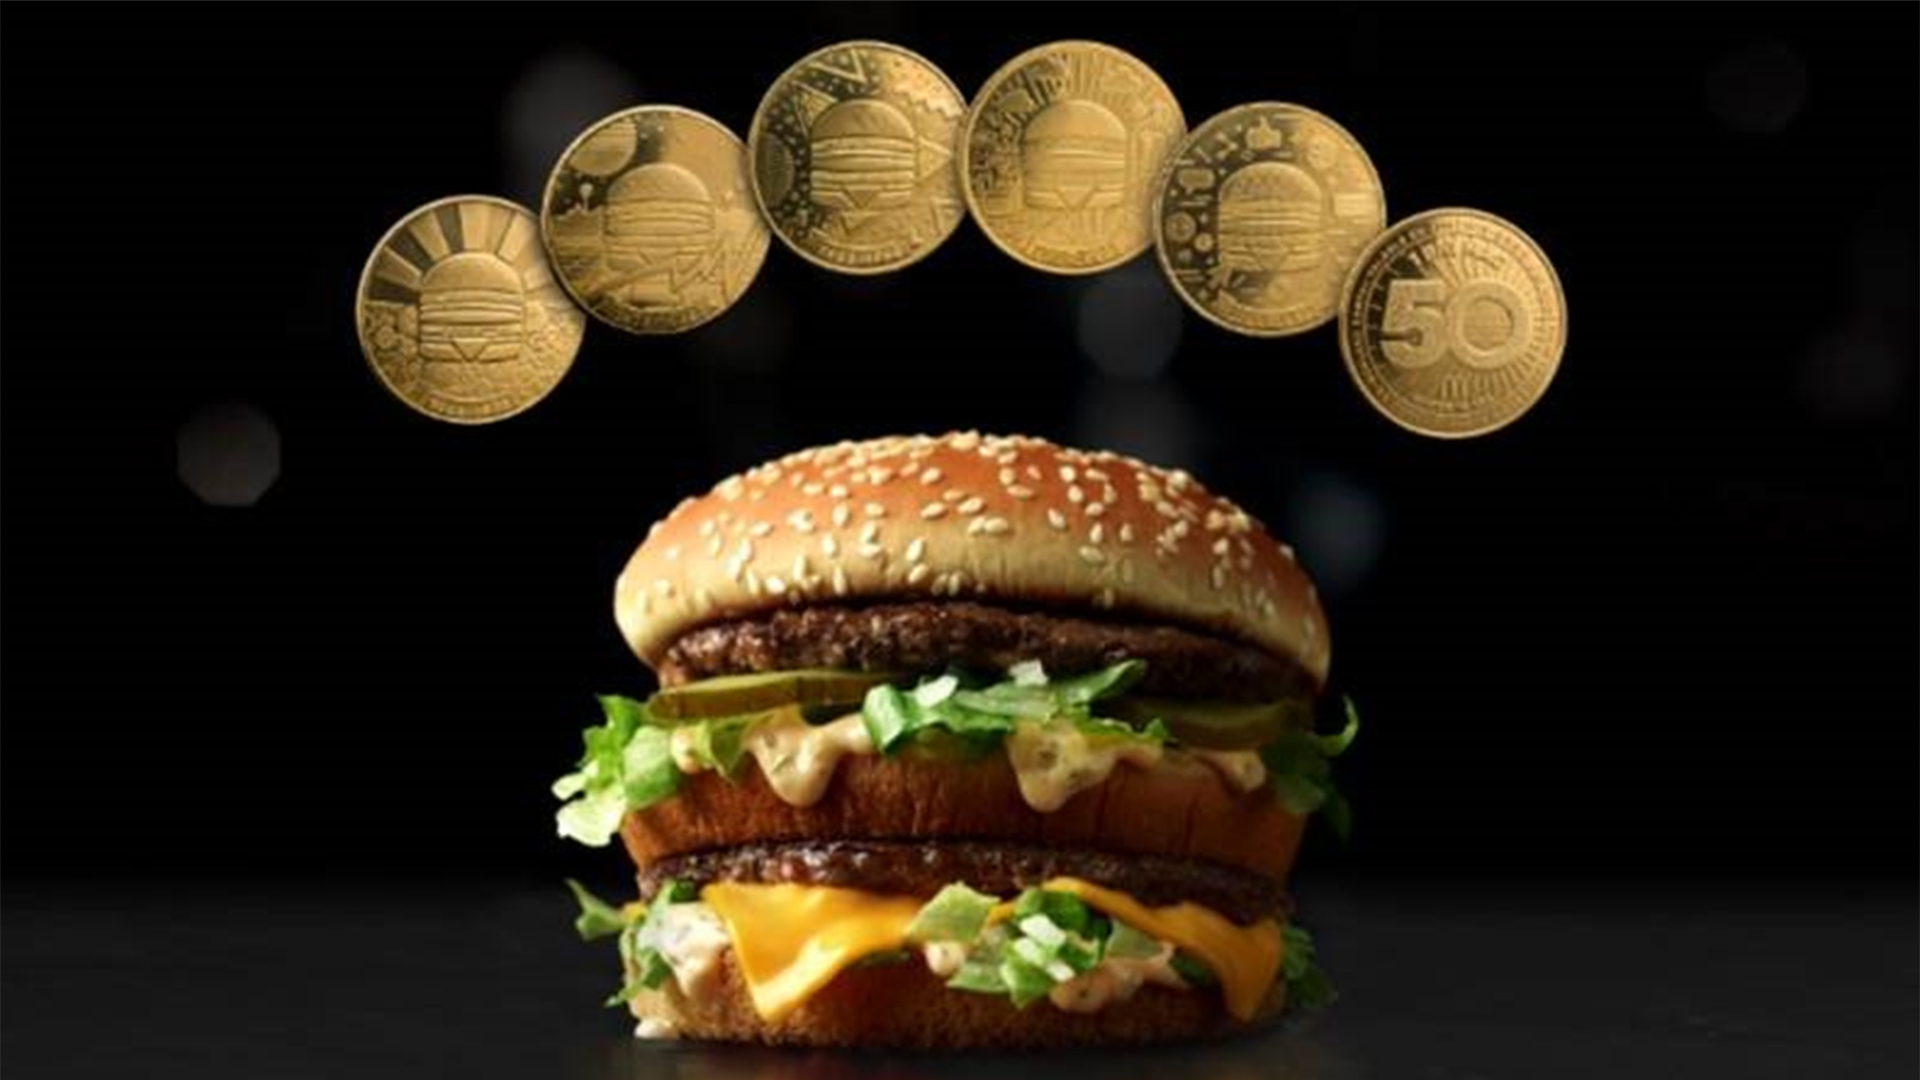 mcdonalds buy one big mac get one for a penny december 17th 2015